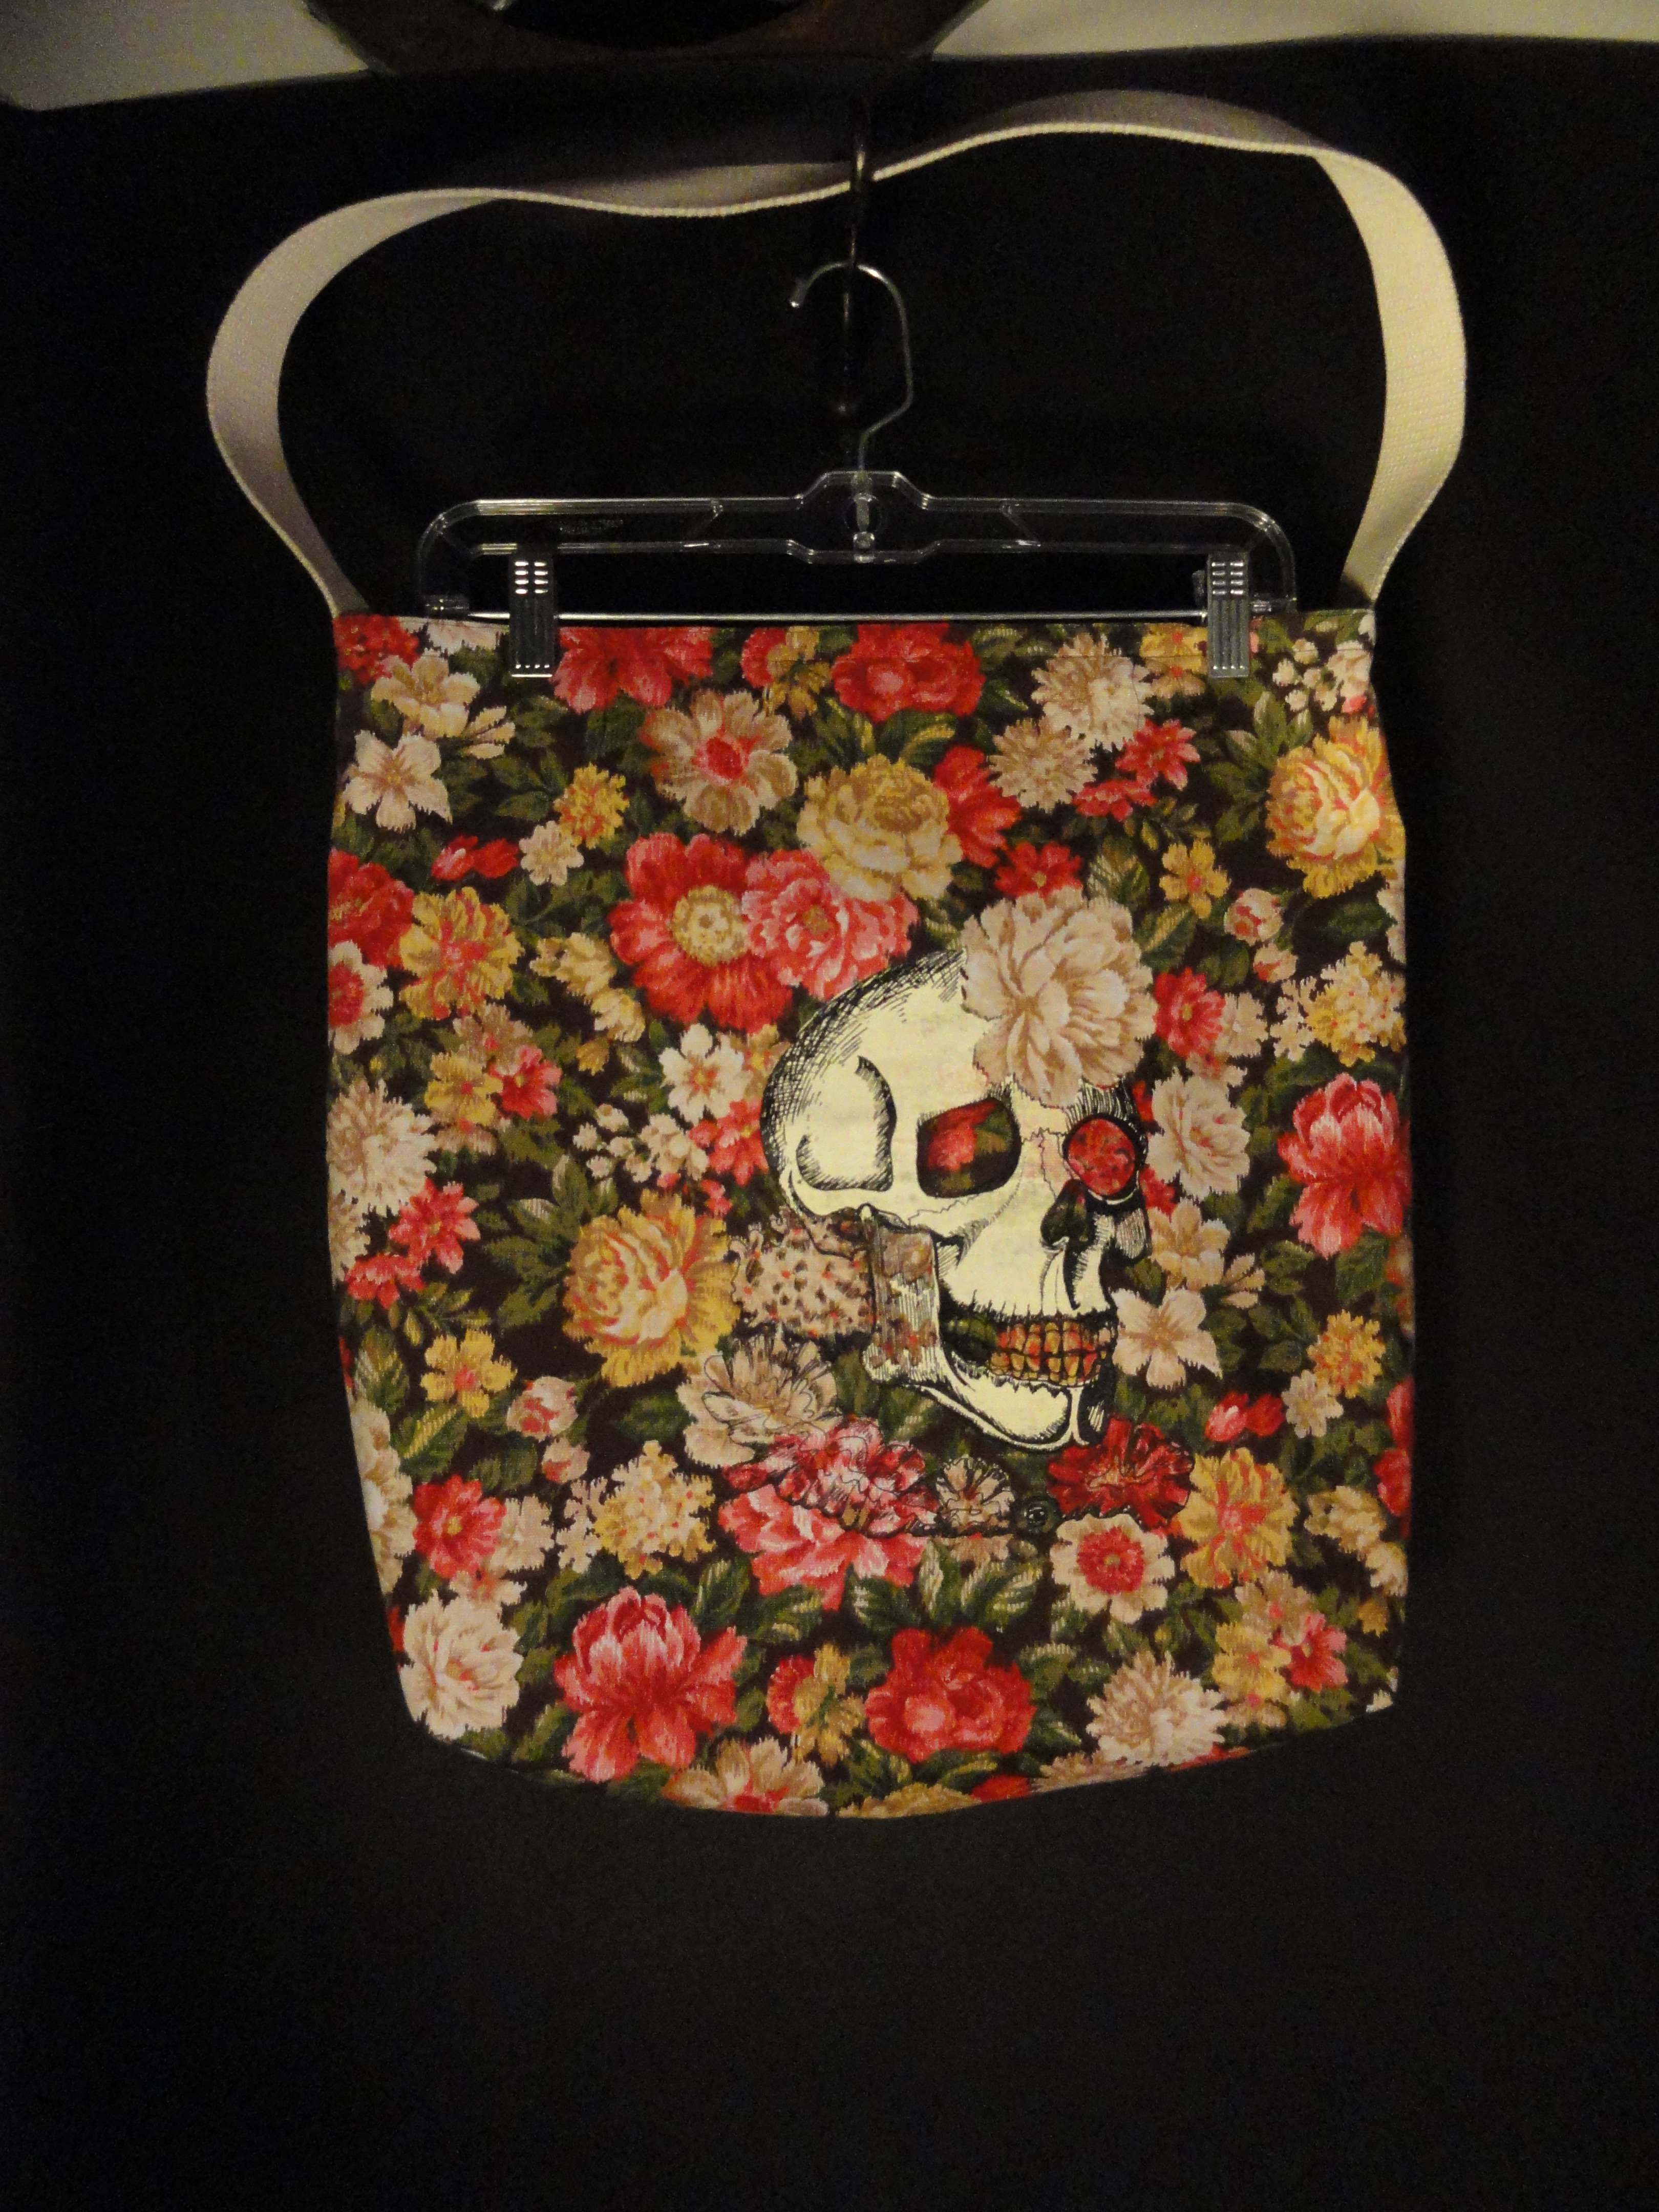 tote bag with skull on it